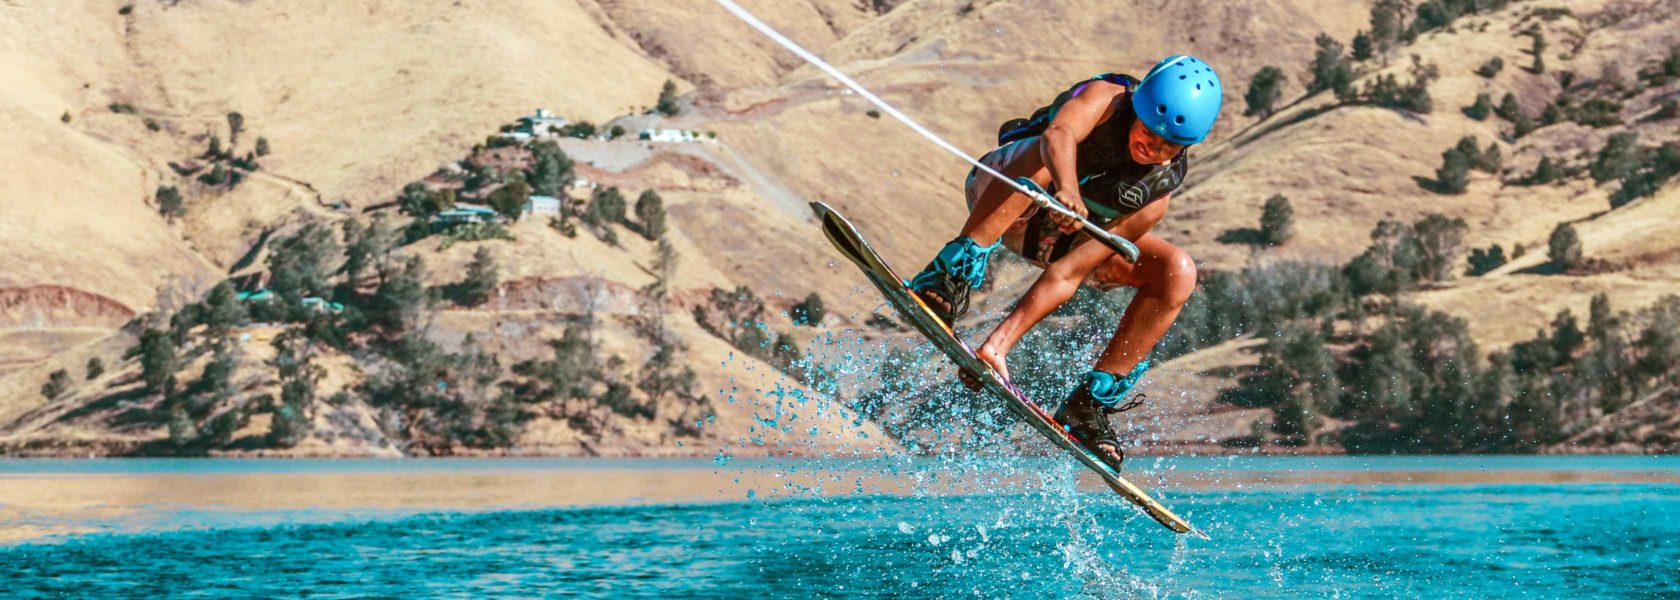 A camper wakeboarding and jumping in the air.